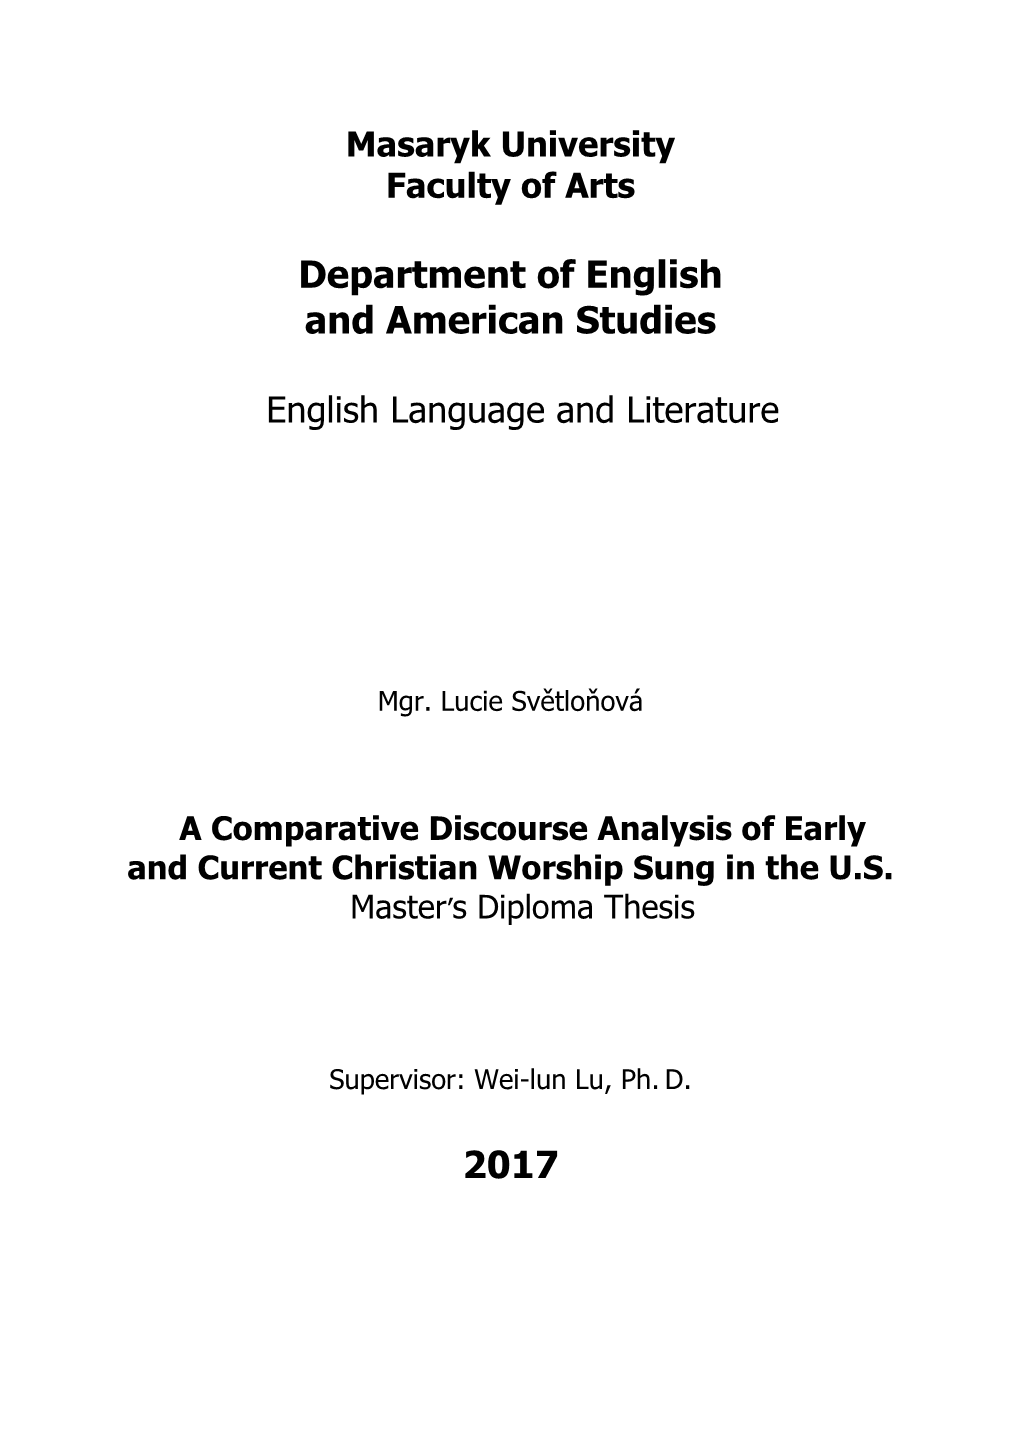 Department of English and American Studies 2017